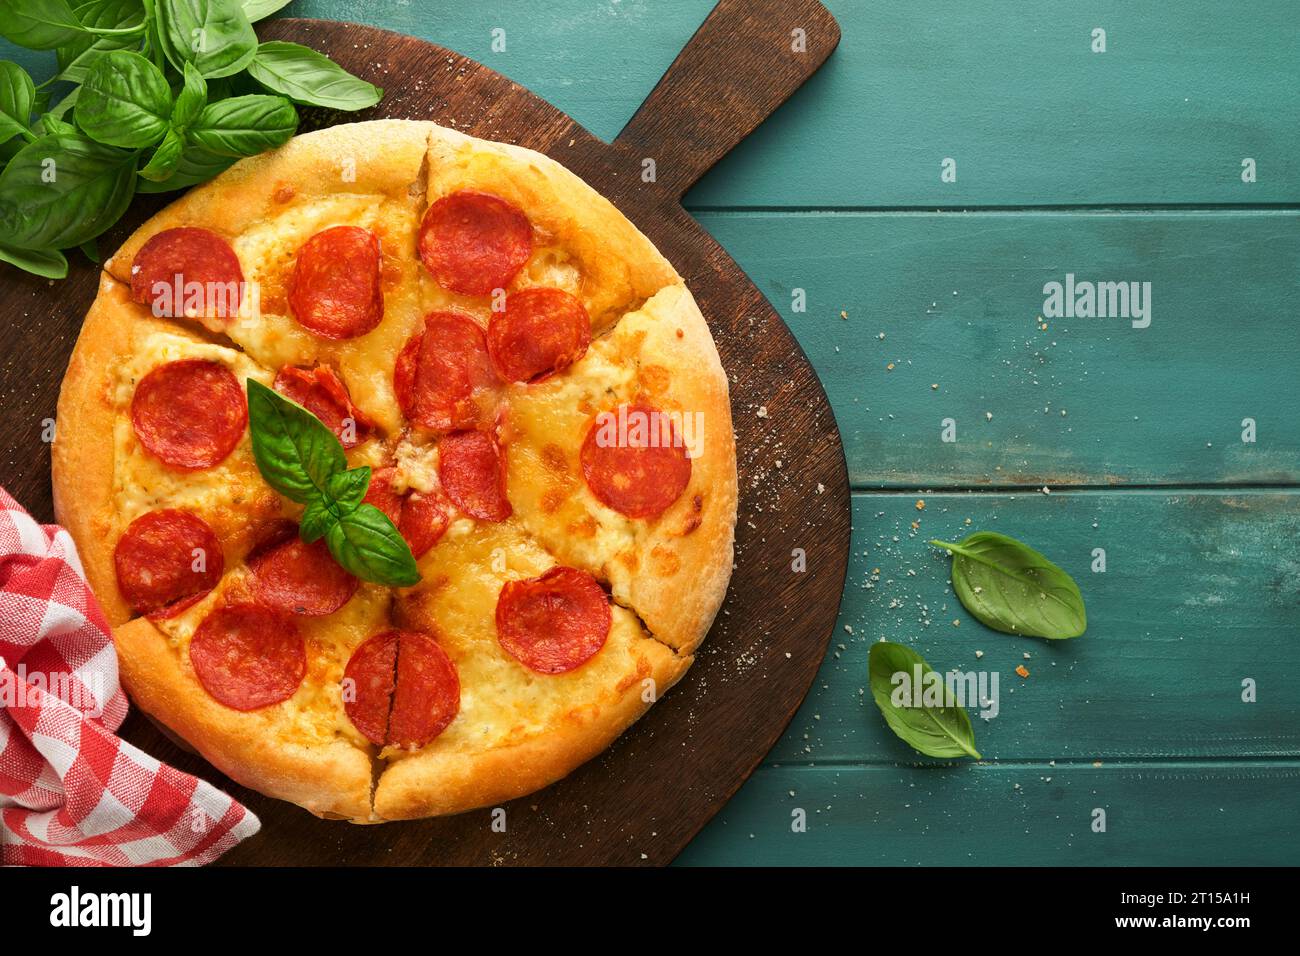 Pepperoni pizza. Traditional pepperoni pizza and cooking ingredients tomatoes basil on wooden table backgrounds. Italian Traditional food. Top view. M Stock Photo